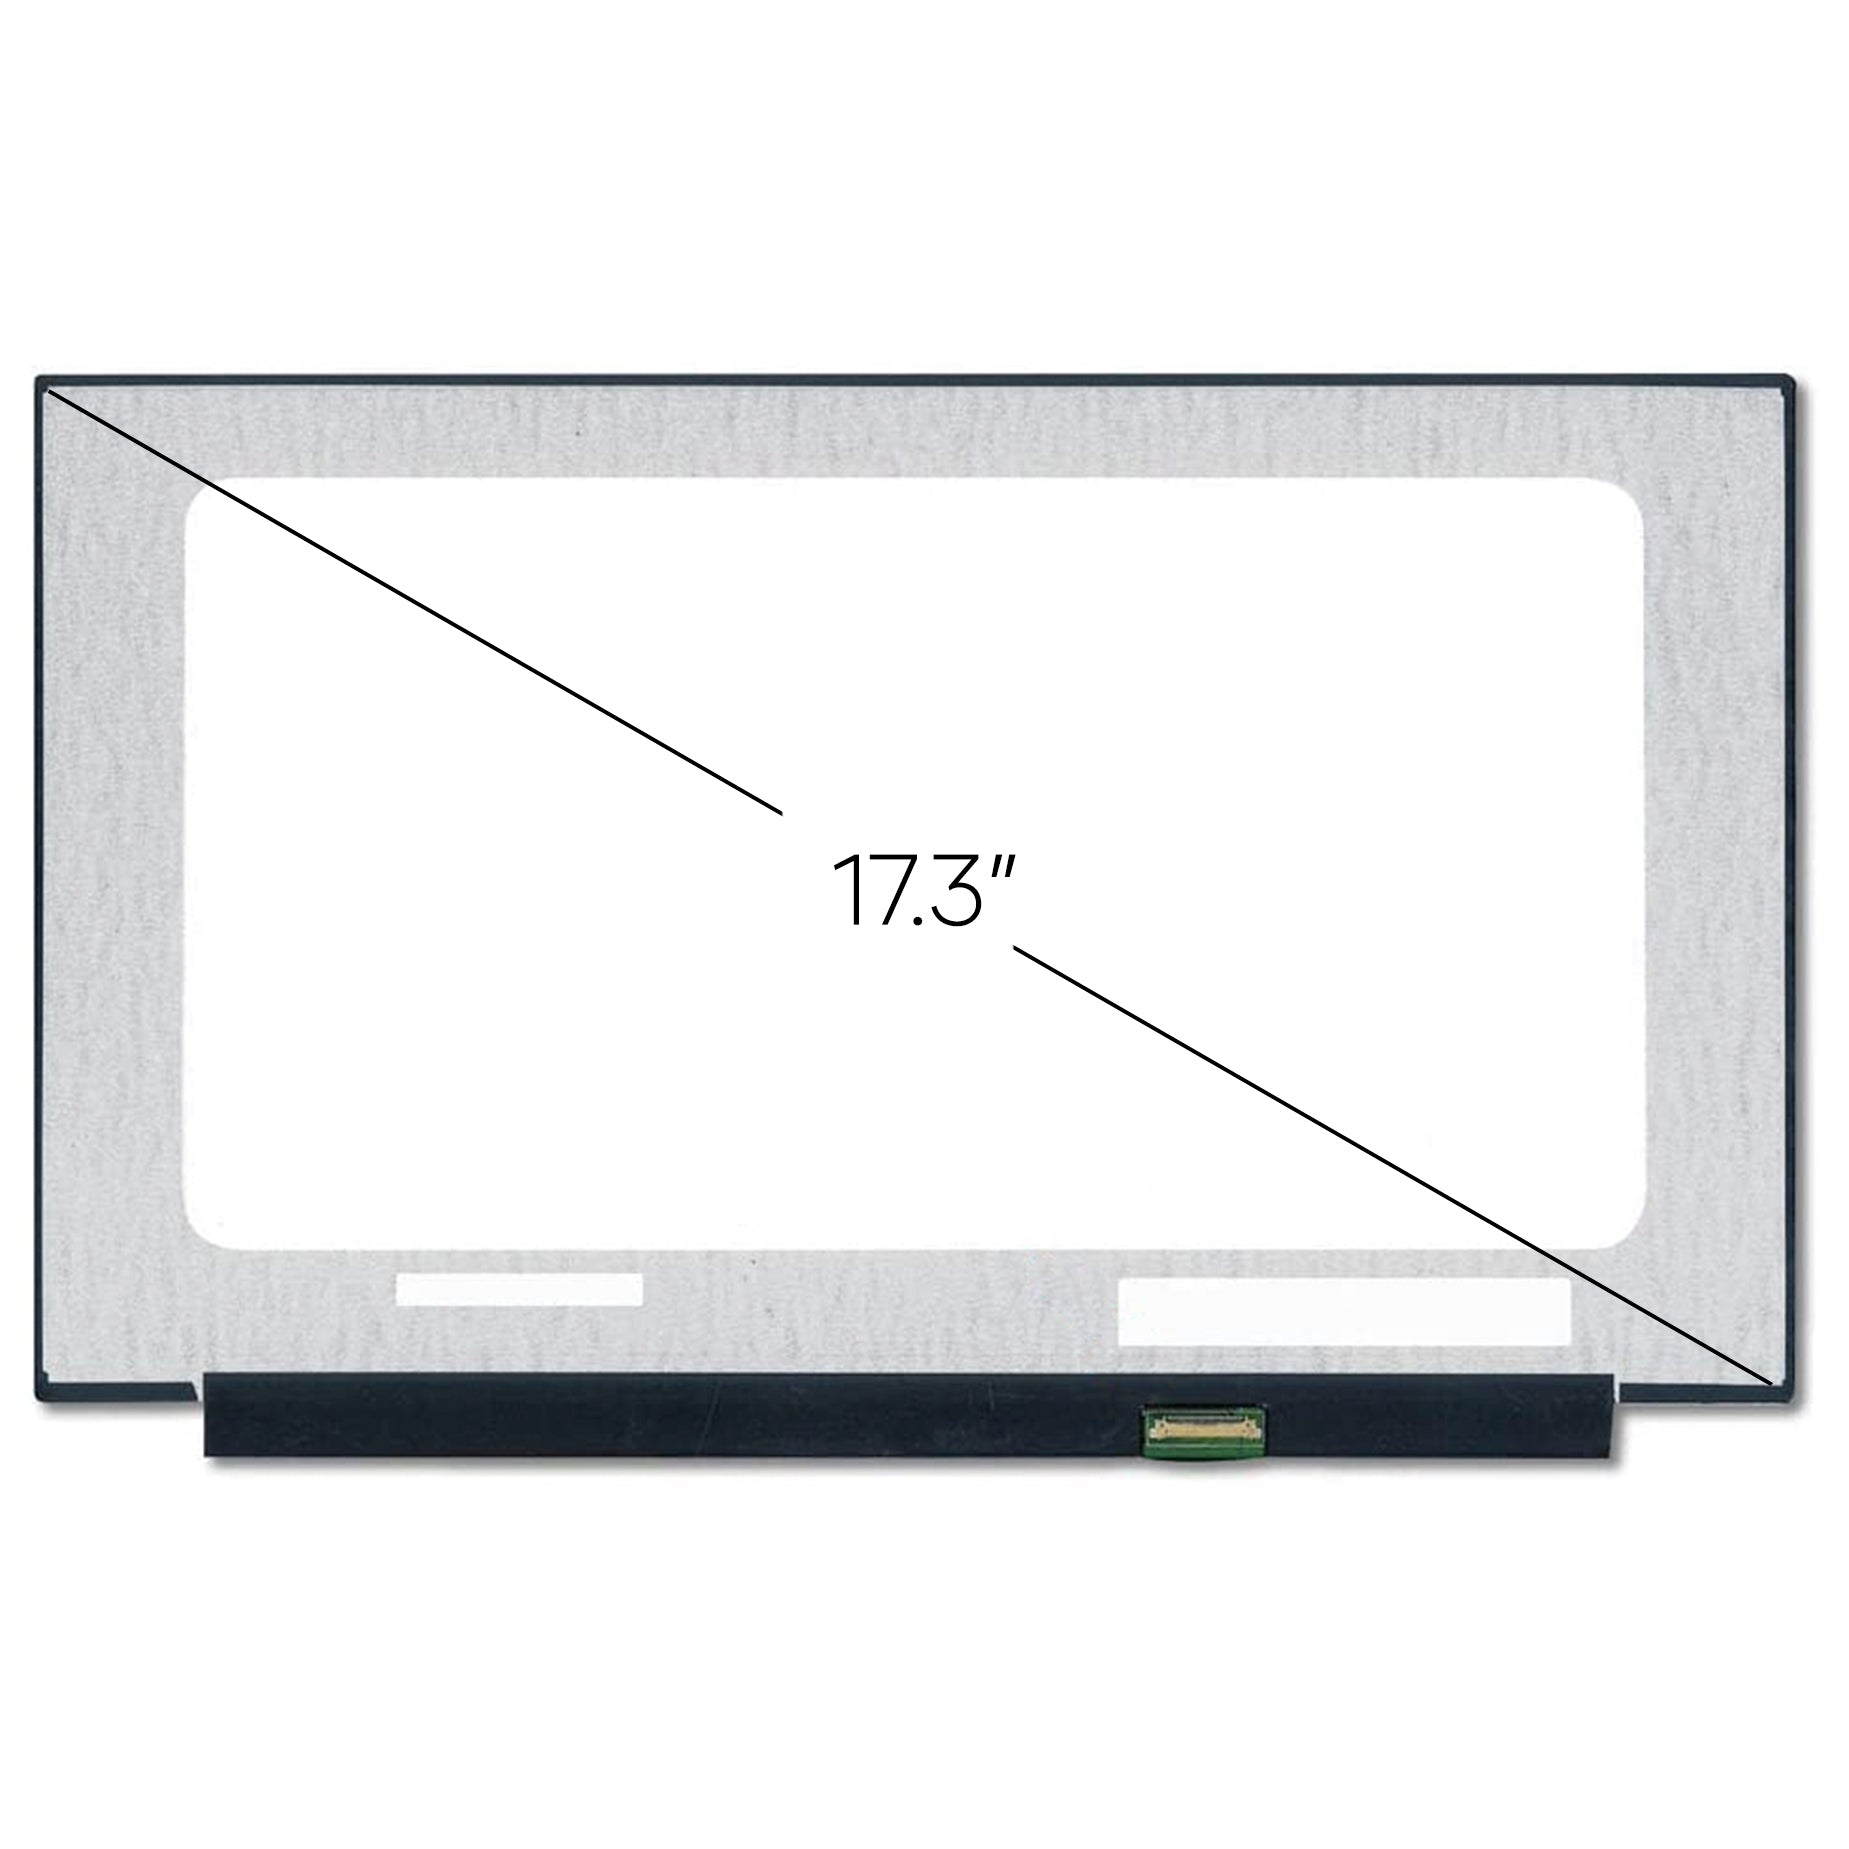 Screen Replacement for LENOVO IDEAPAD 5D10J46199 HD+ 1600x900 Glossy LCD LED Display